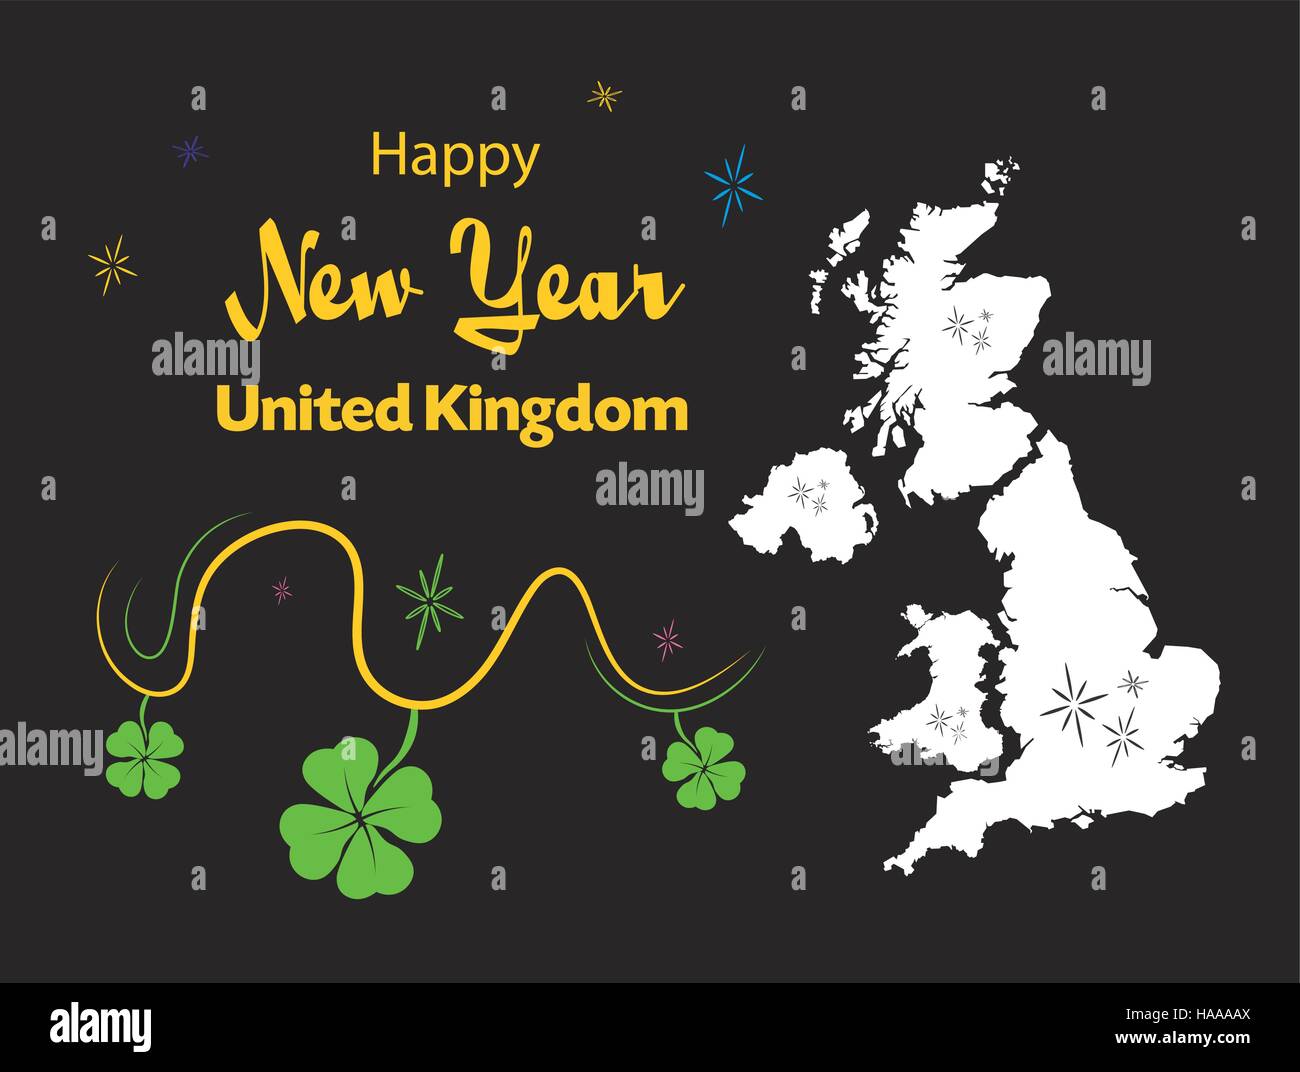 Happy New Year illustration theme with map of United Kingdom Stock Vector